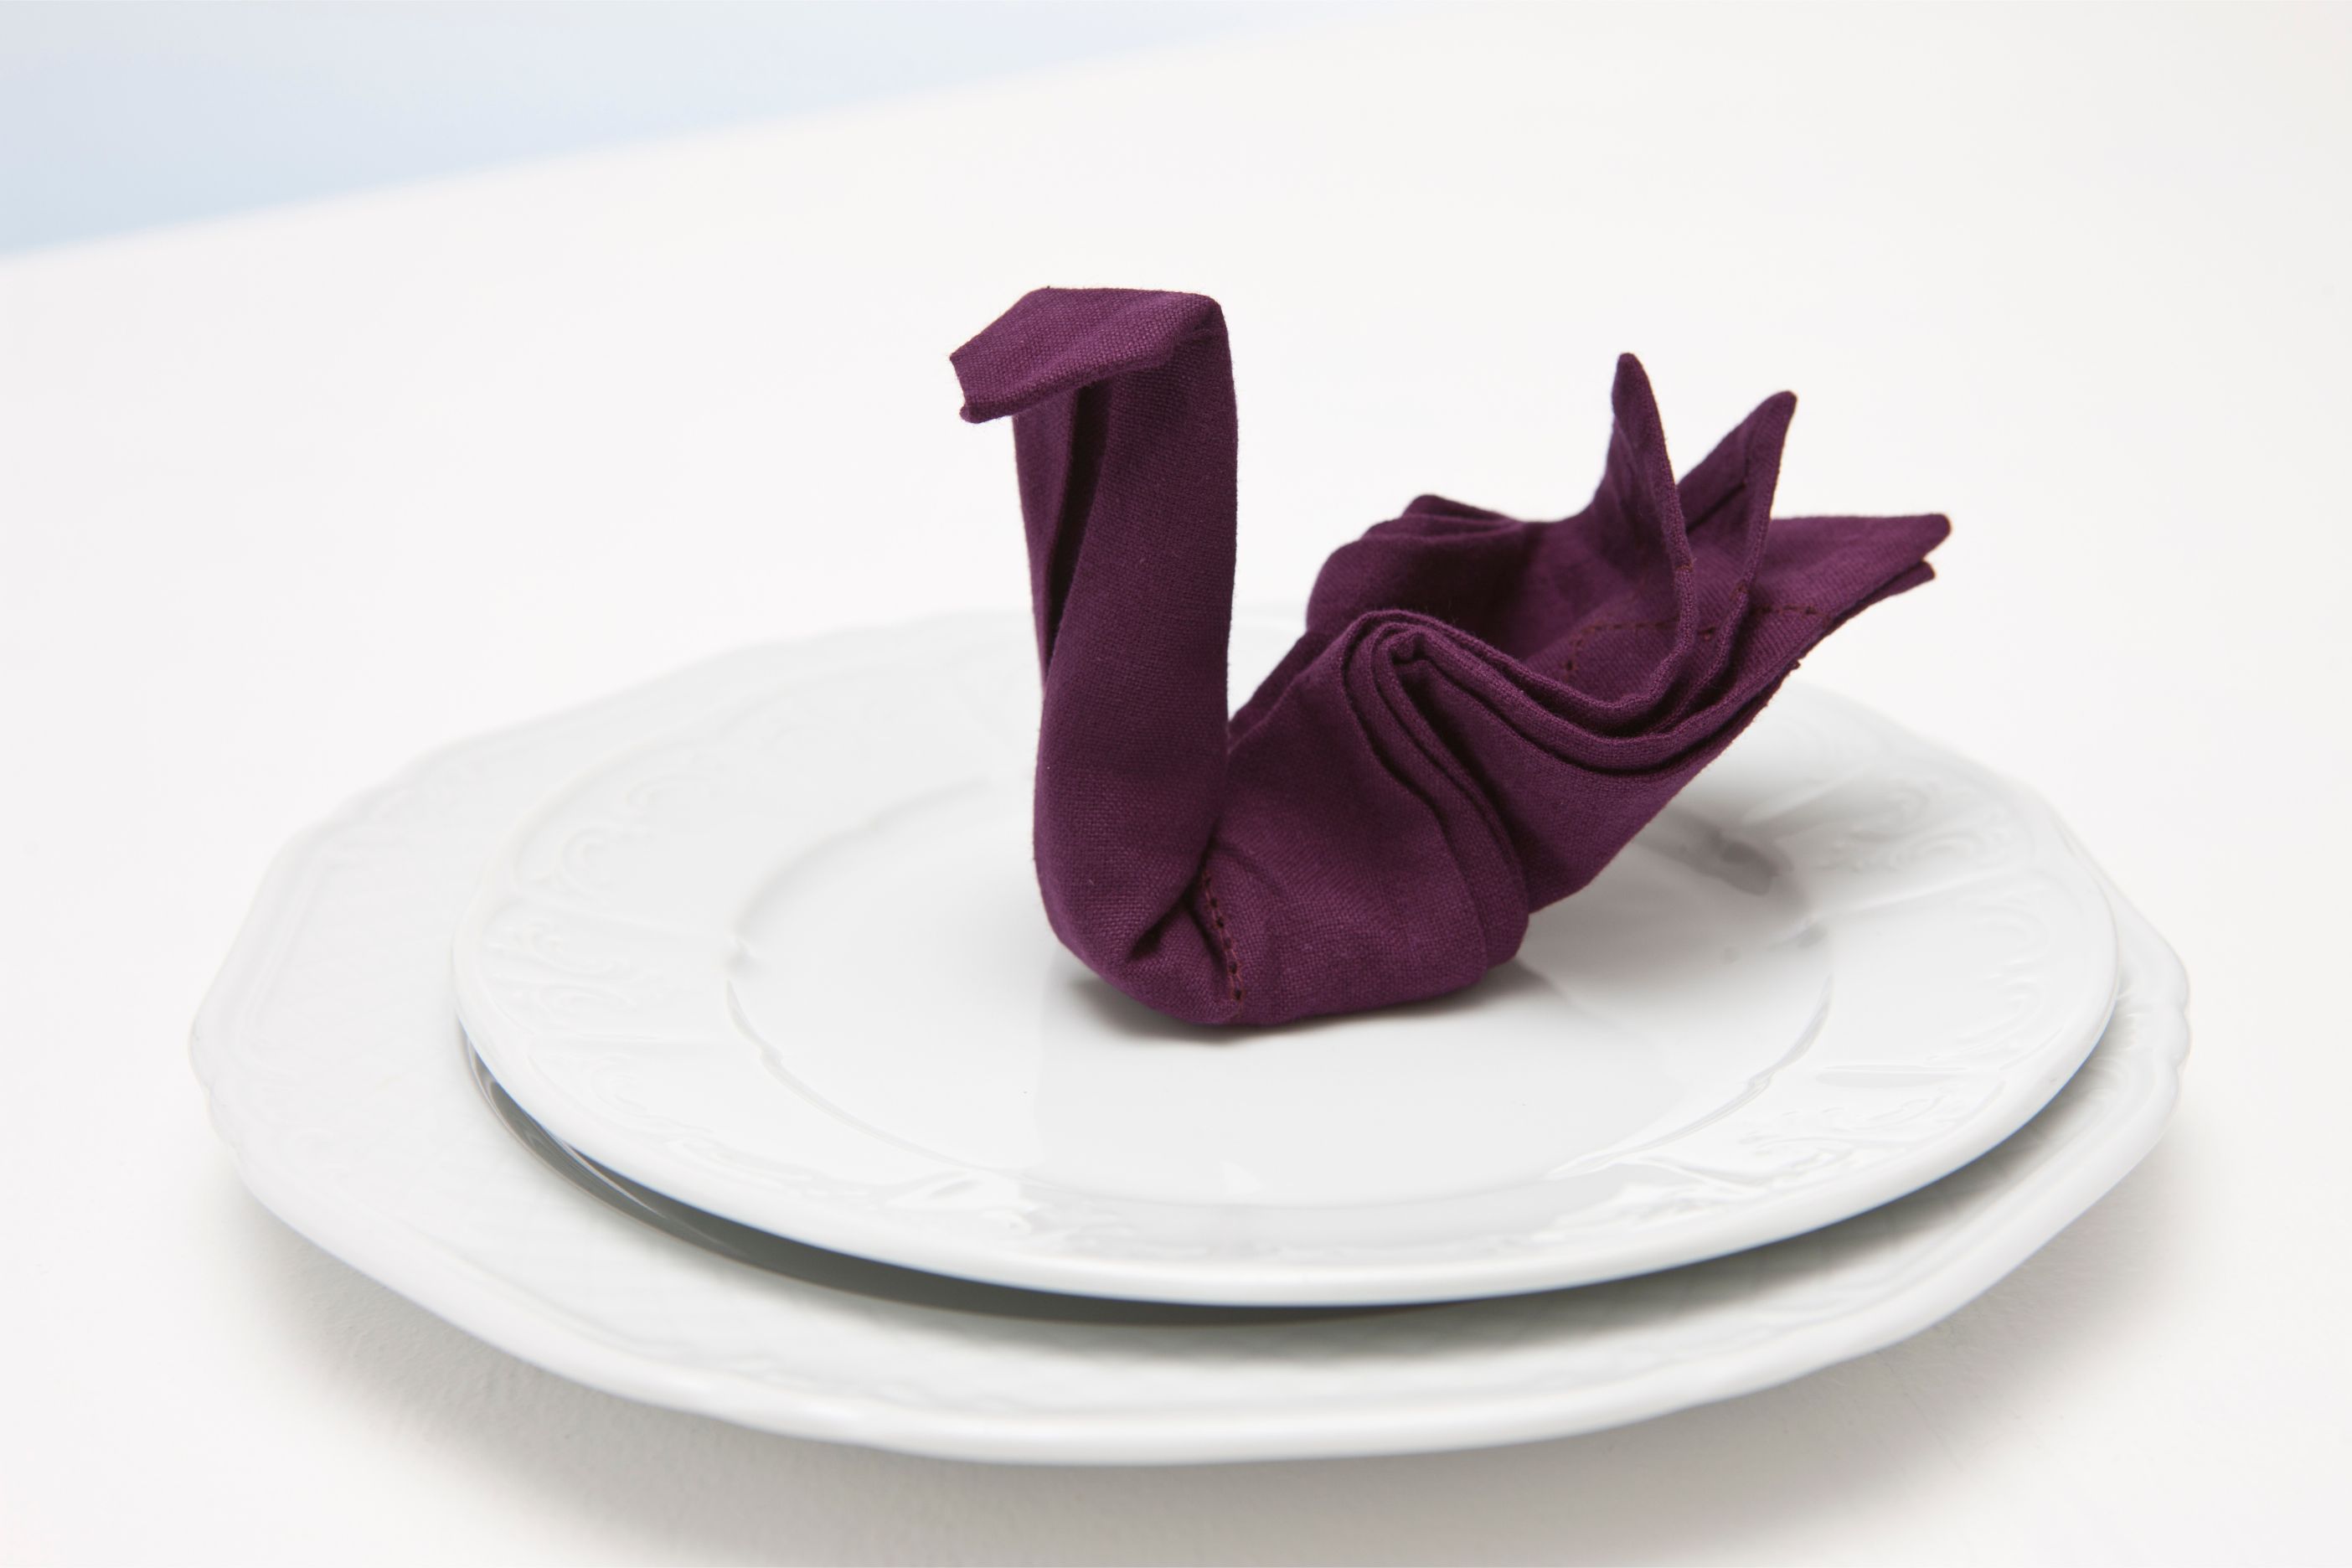 How To Fold A Napkin Into A Swan